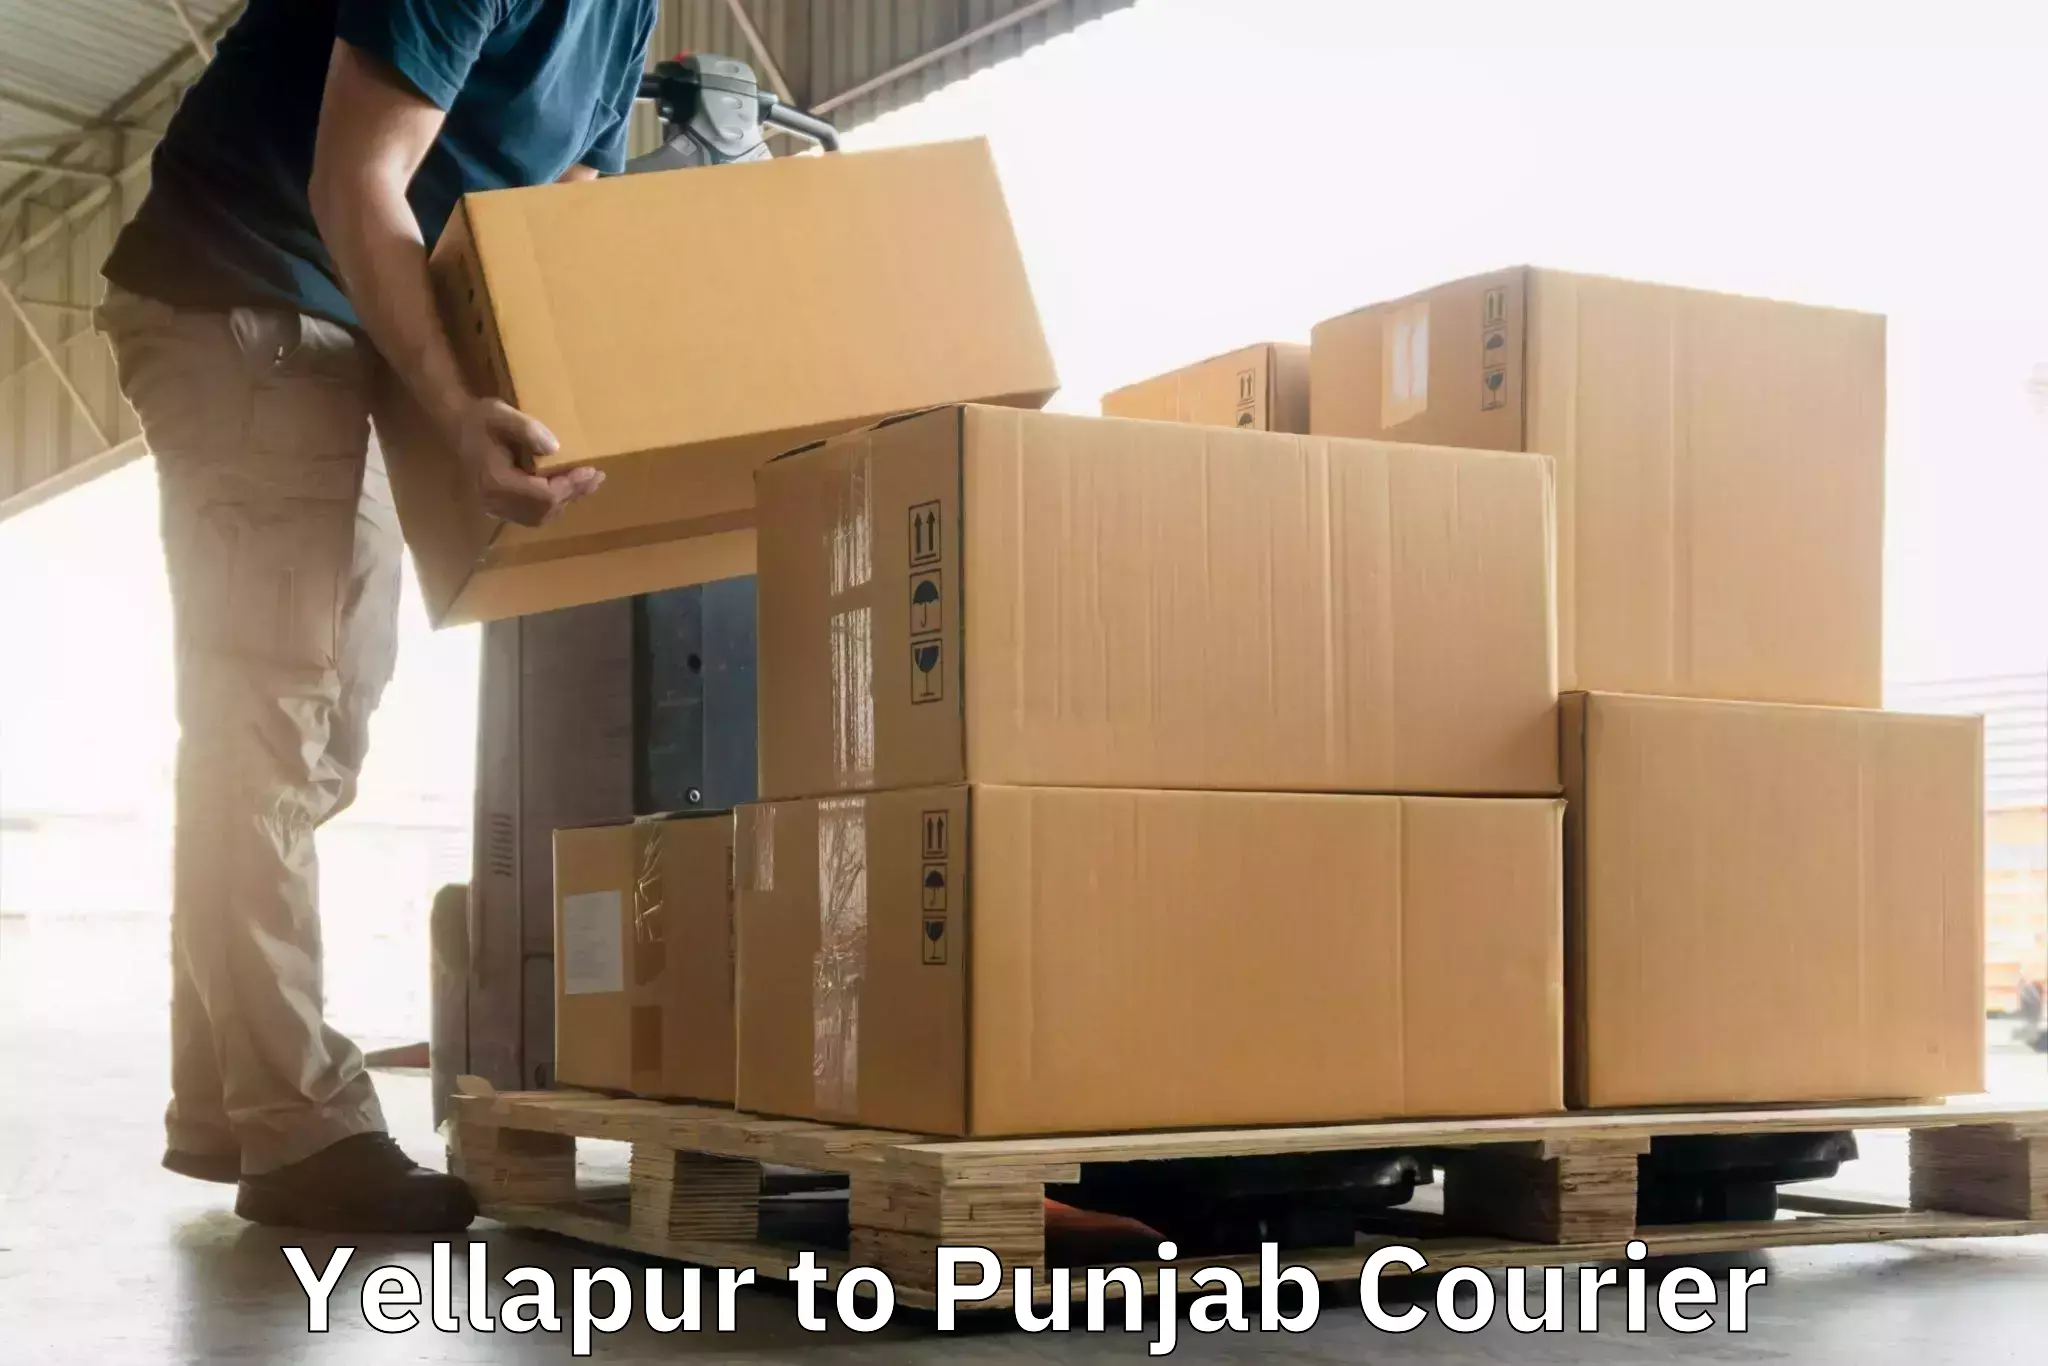 Automated parcel services Yellapur to Begowal